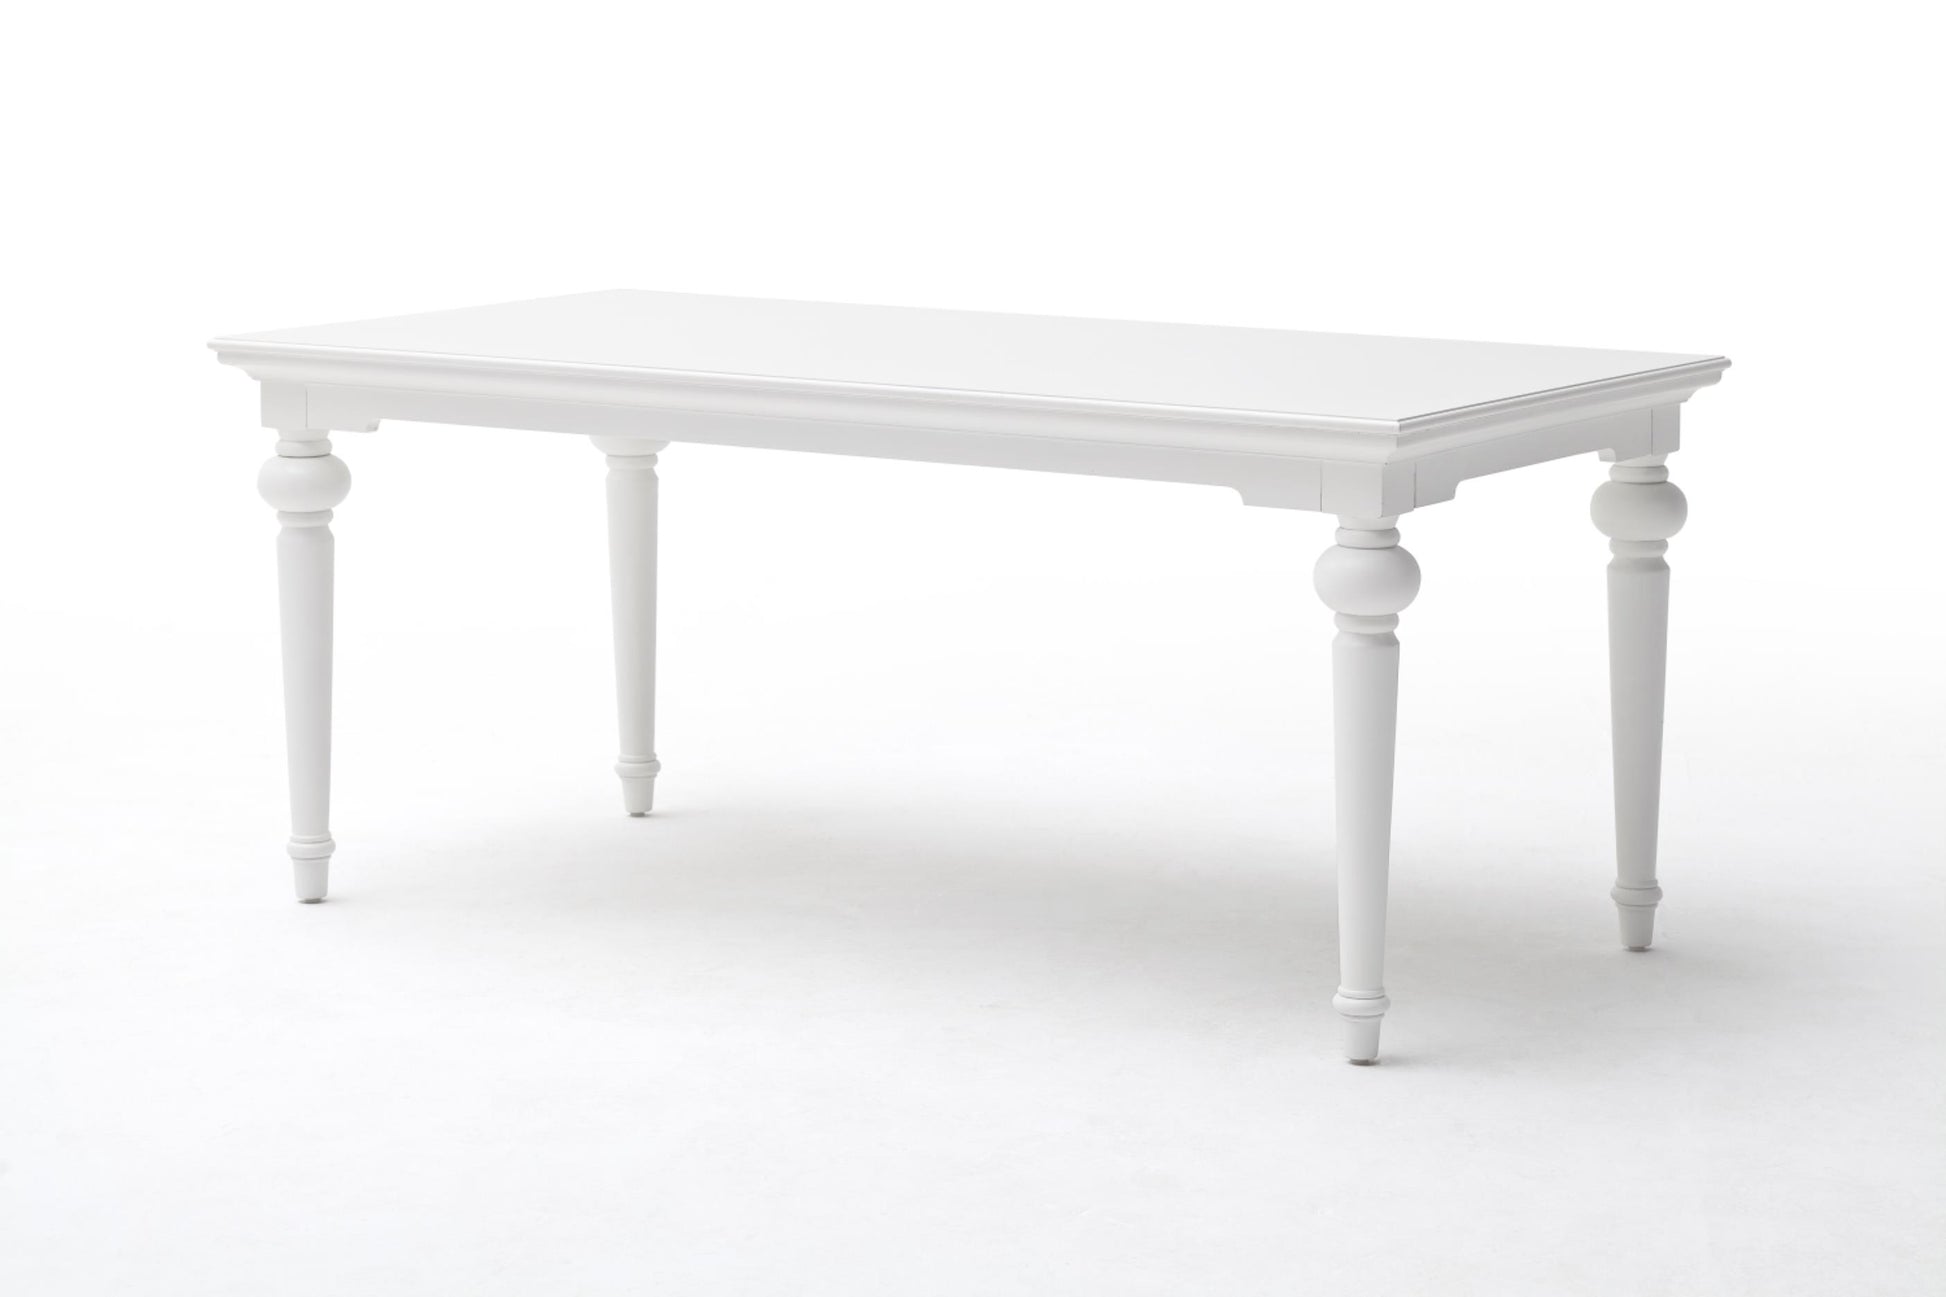 Provence collection by Nova Solo.  79" Dining Table CasaFenix